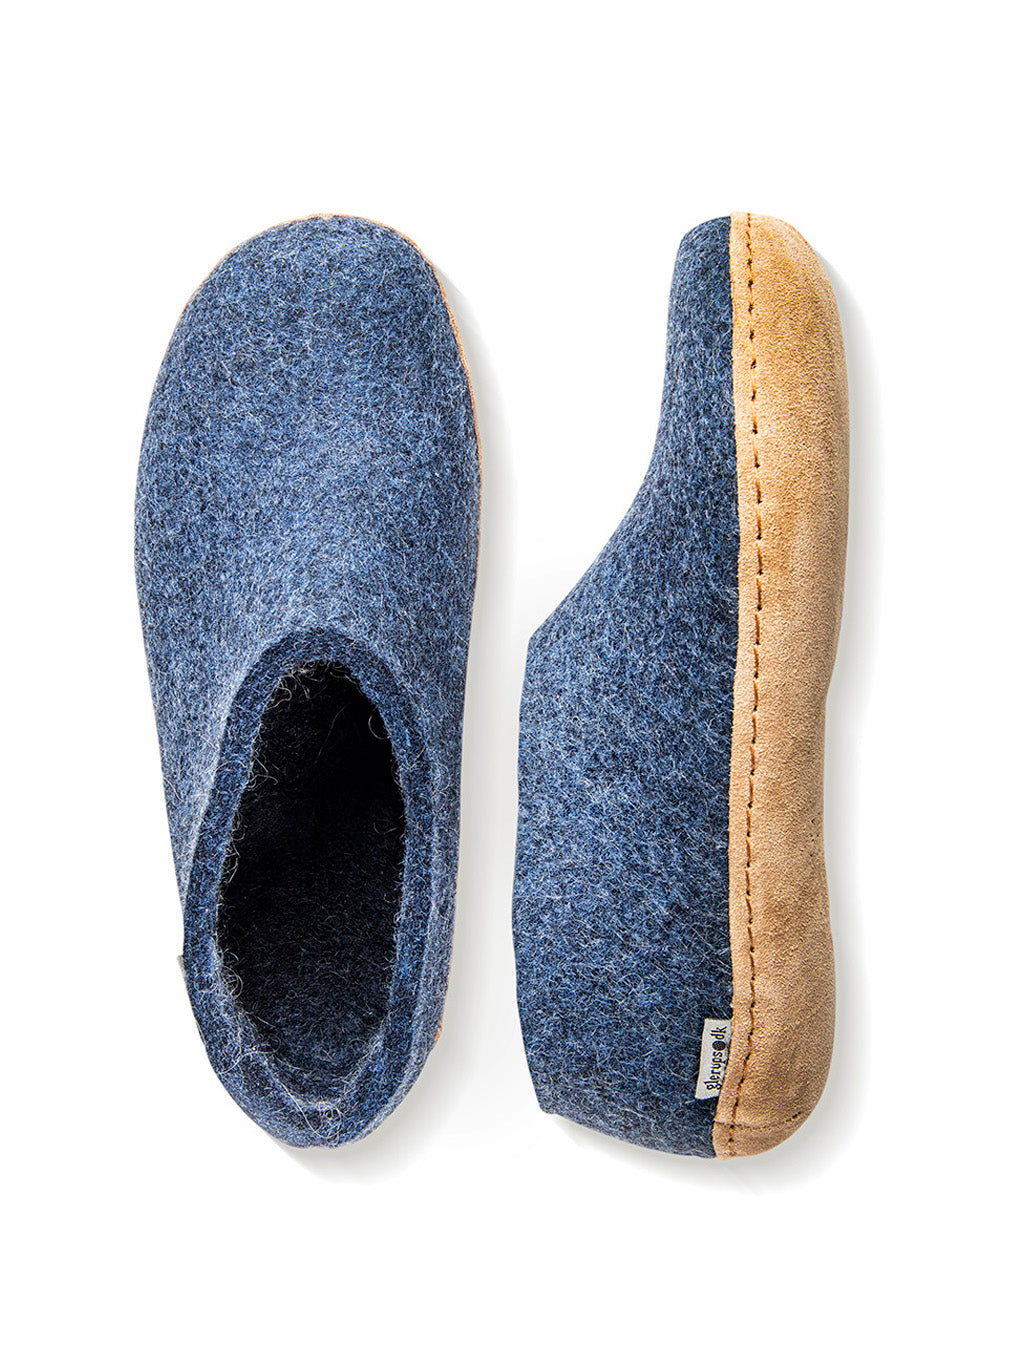 Denim blue wool shoe with leather sole